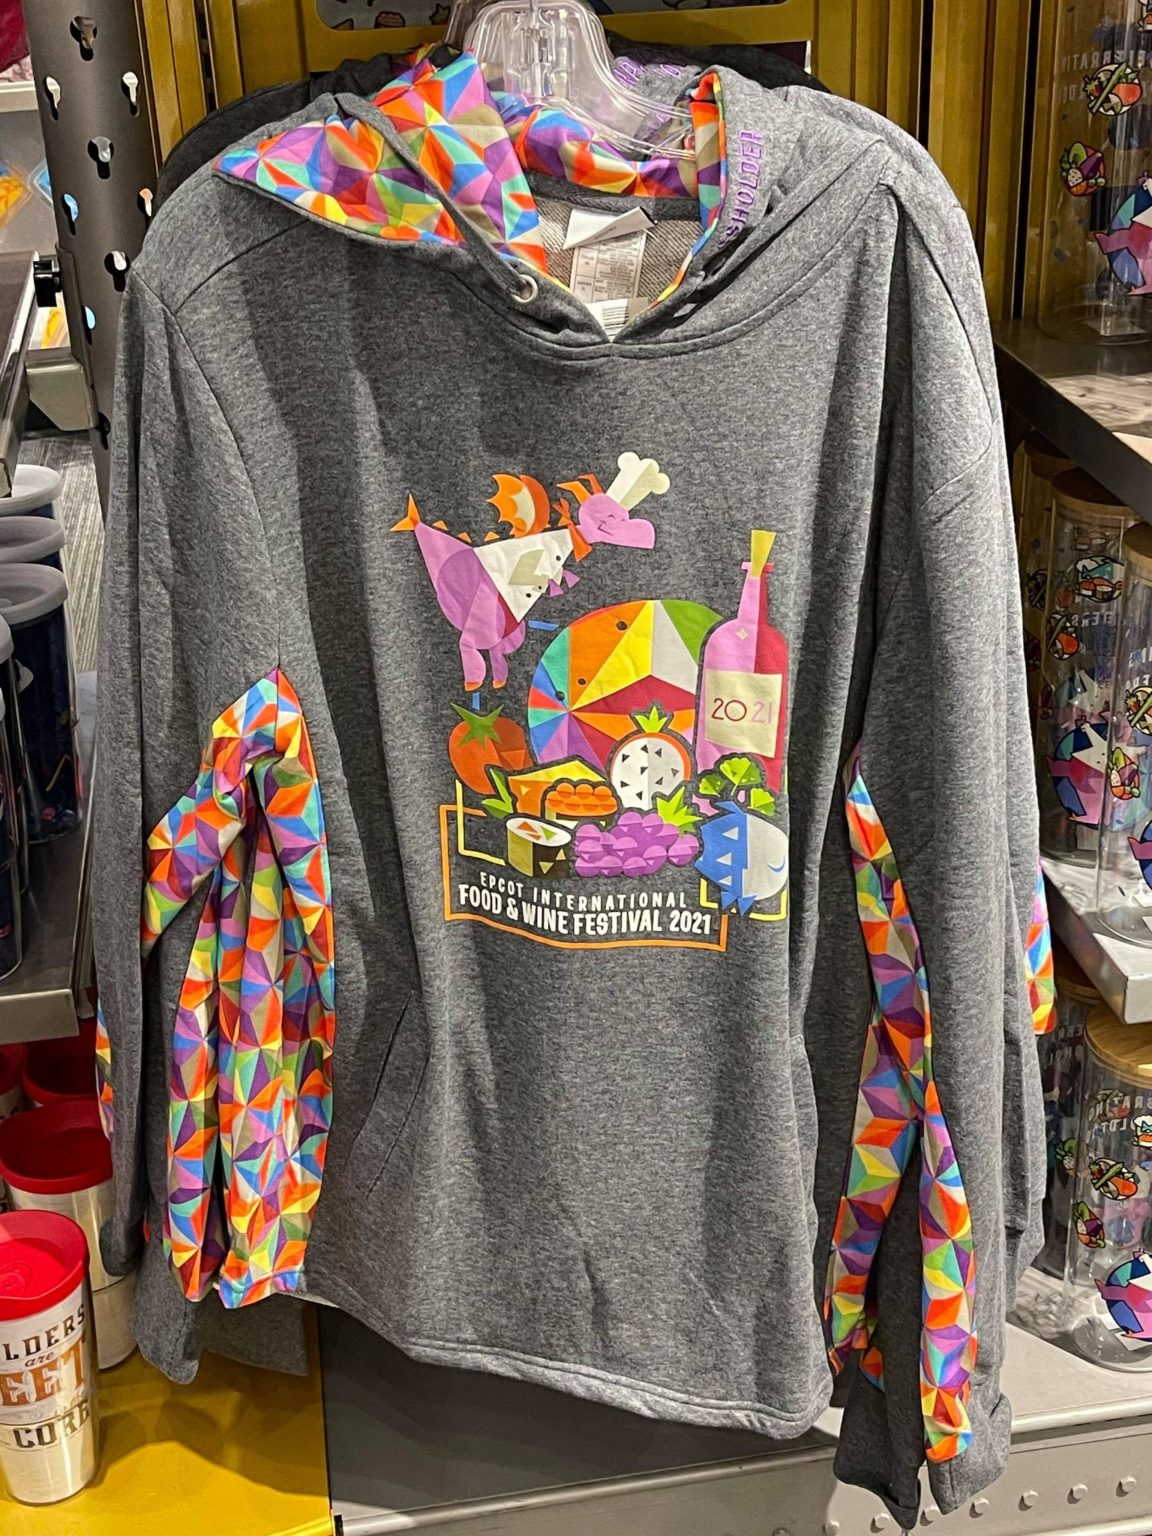 This New Figment Sweatshirt Is a Kaleidoscope of Colors - MickeyBlog.com